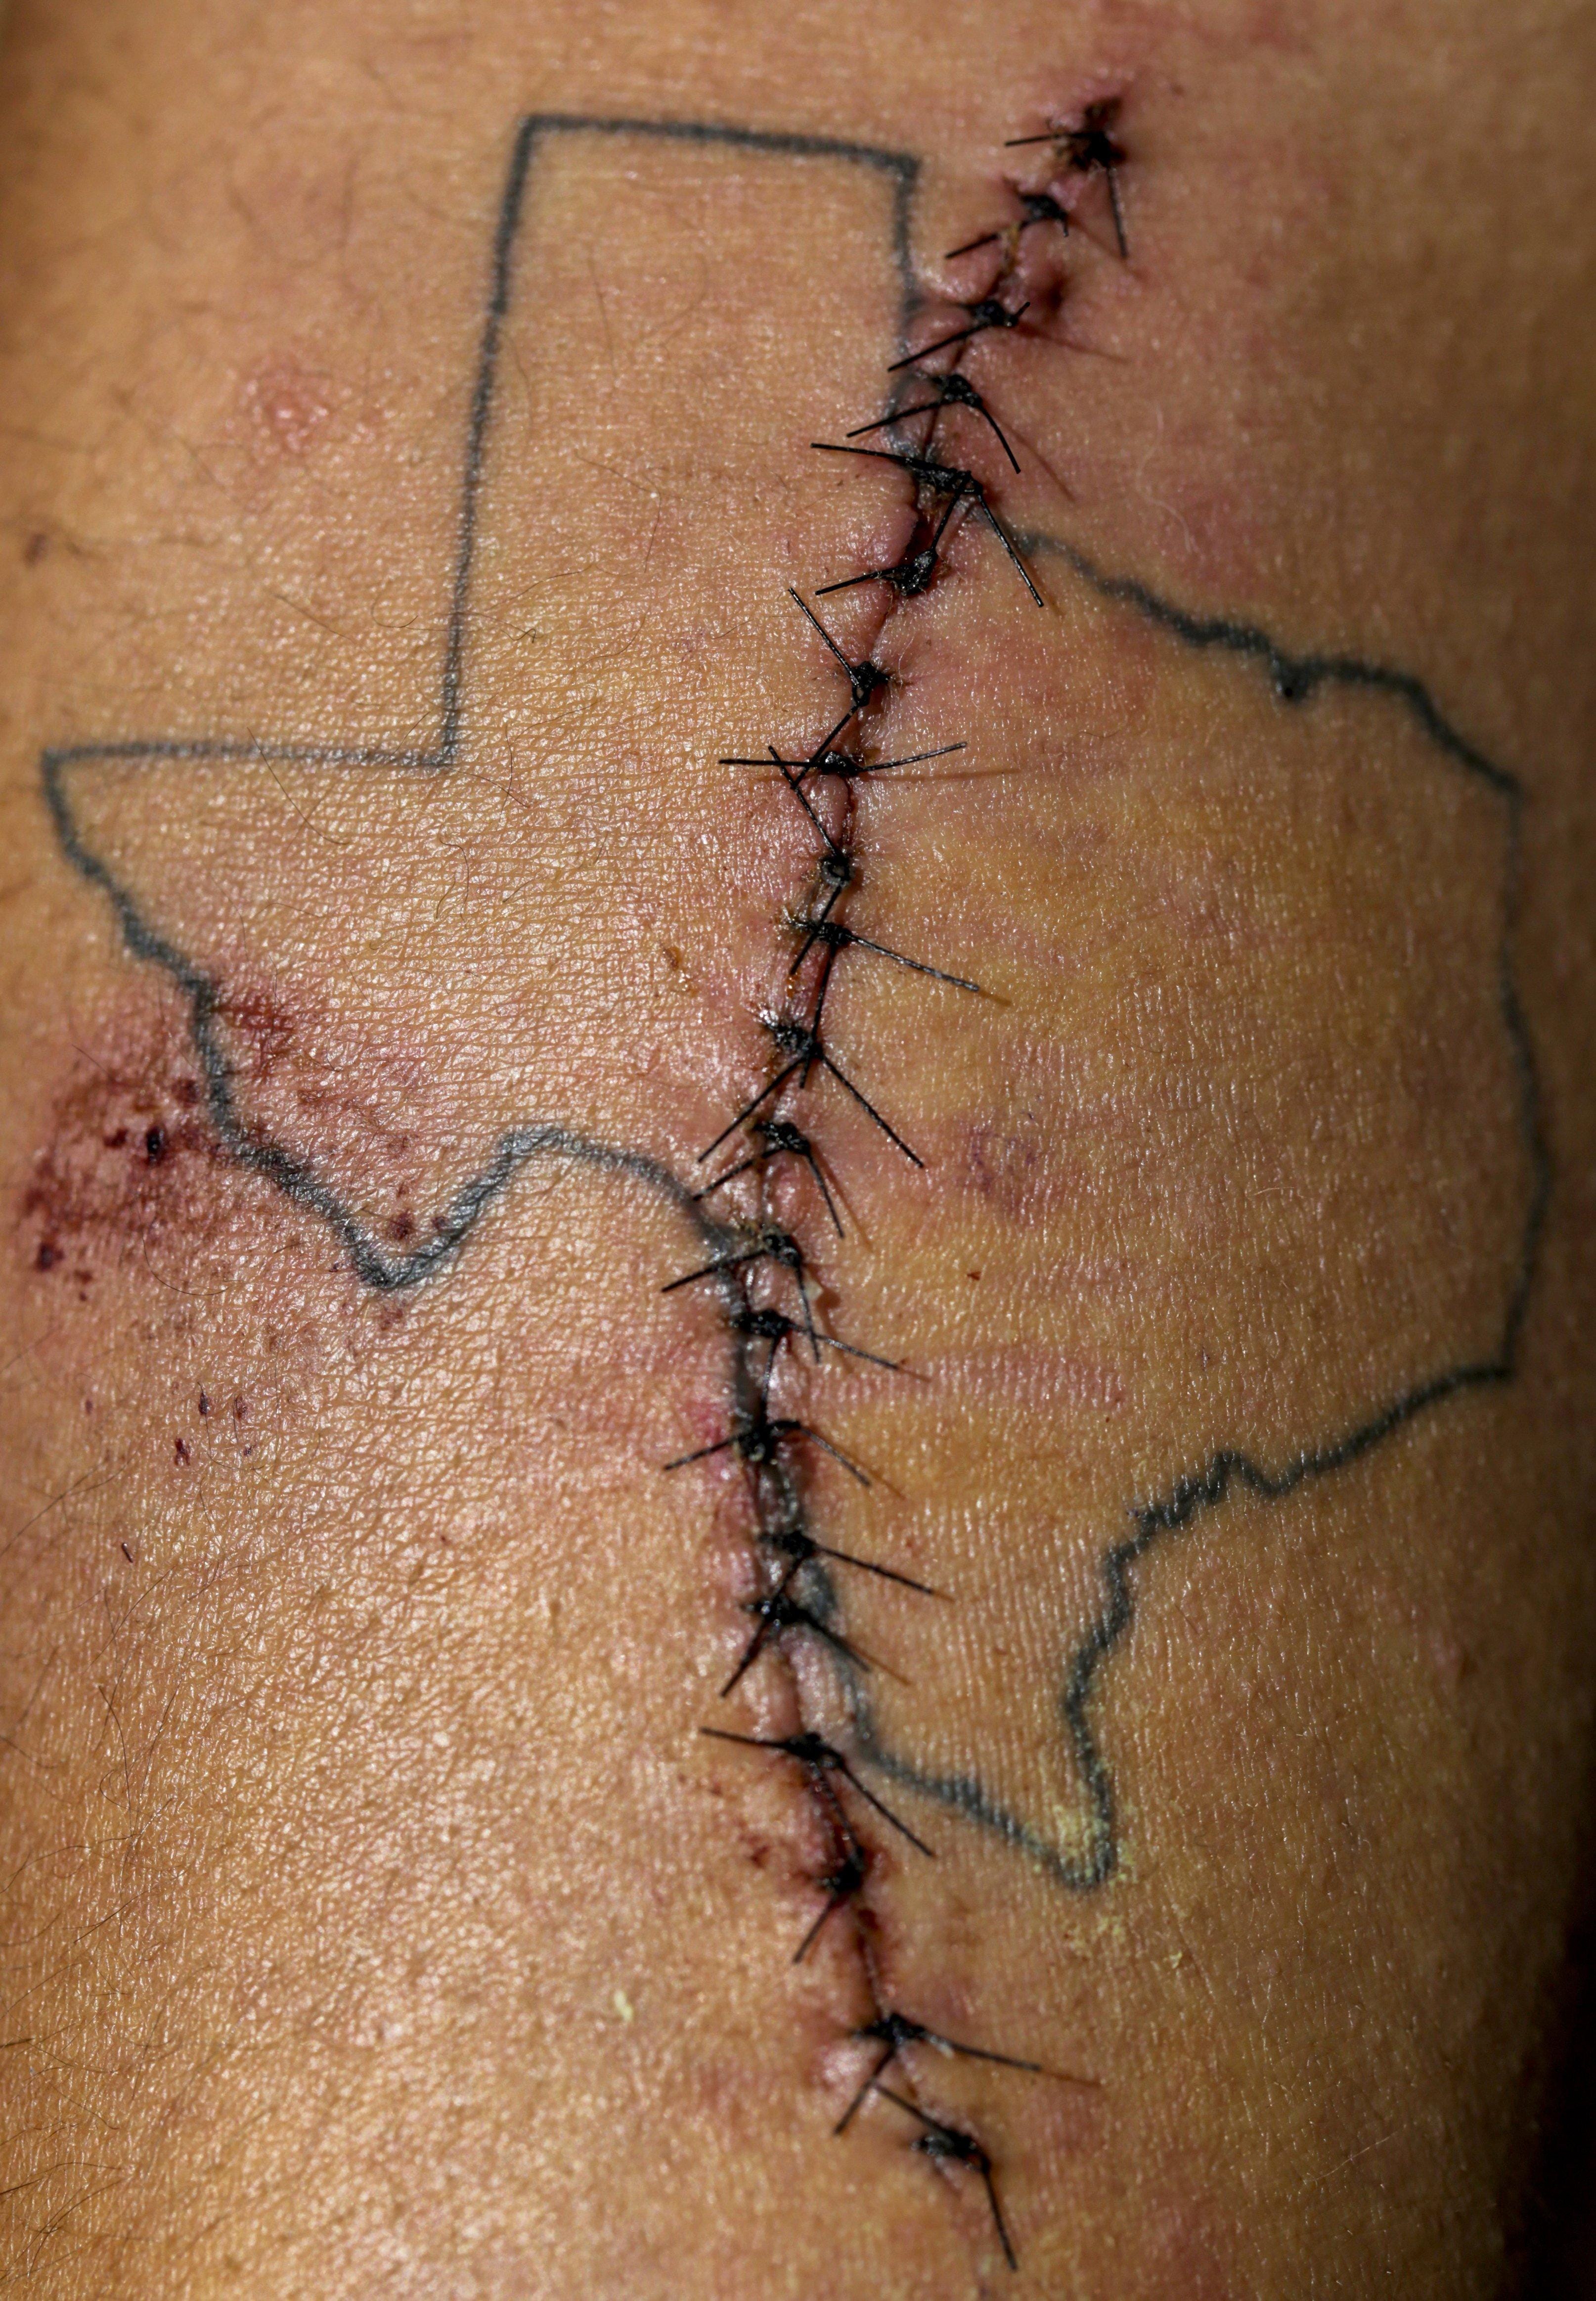 Stitches run through the center of Gemicah Jones' tattoo of Texas. Jones, 20, was attending a May 30 protest against police brutality with his friends when he was struck by a less-lethal projectile. He needed emergency surgery because it had entered near an artery in his forearm.